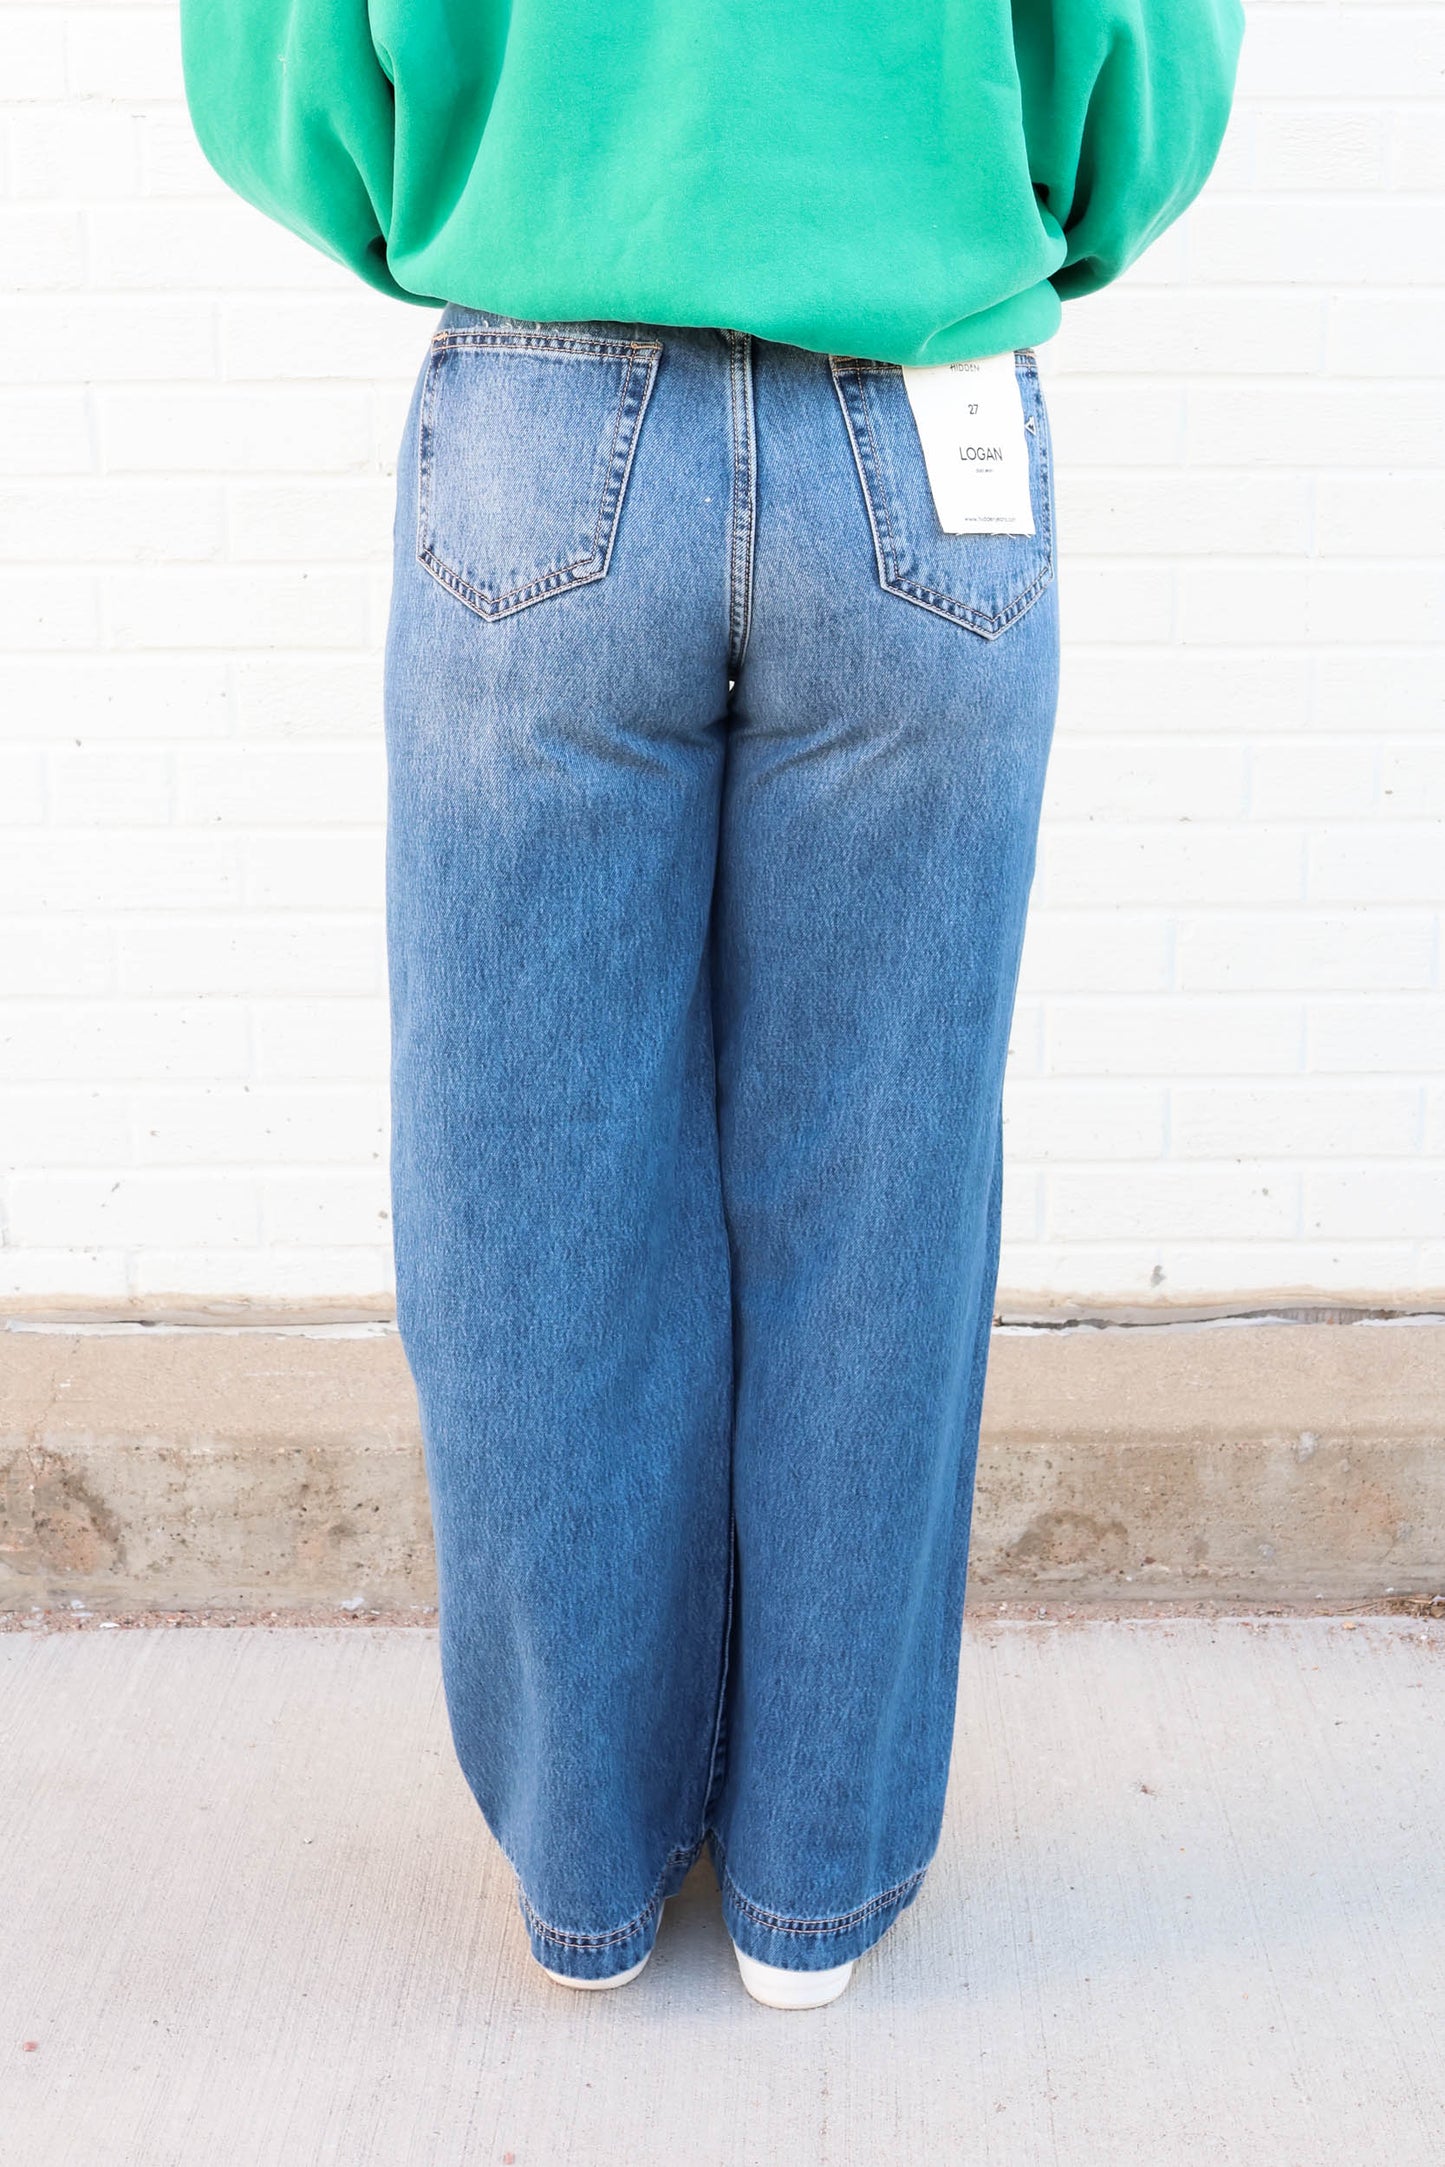 Women's Jeans  The Vault Clothing Co – The Vault Clothing Co.